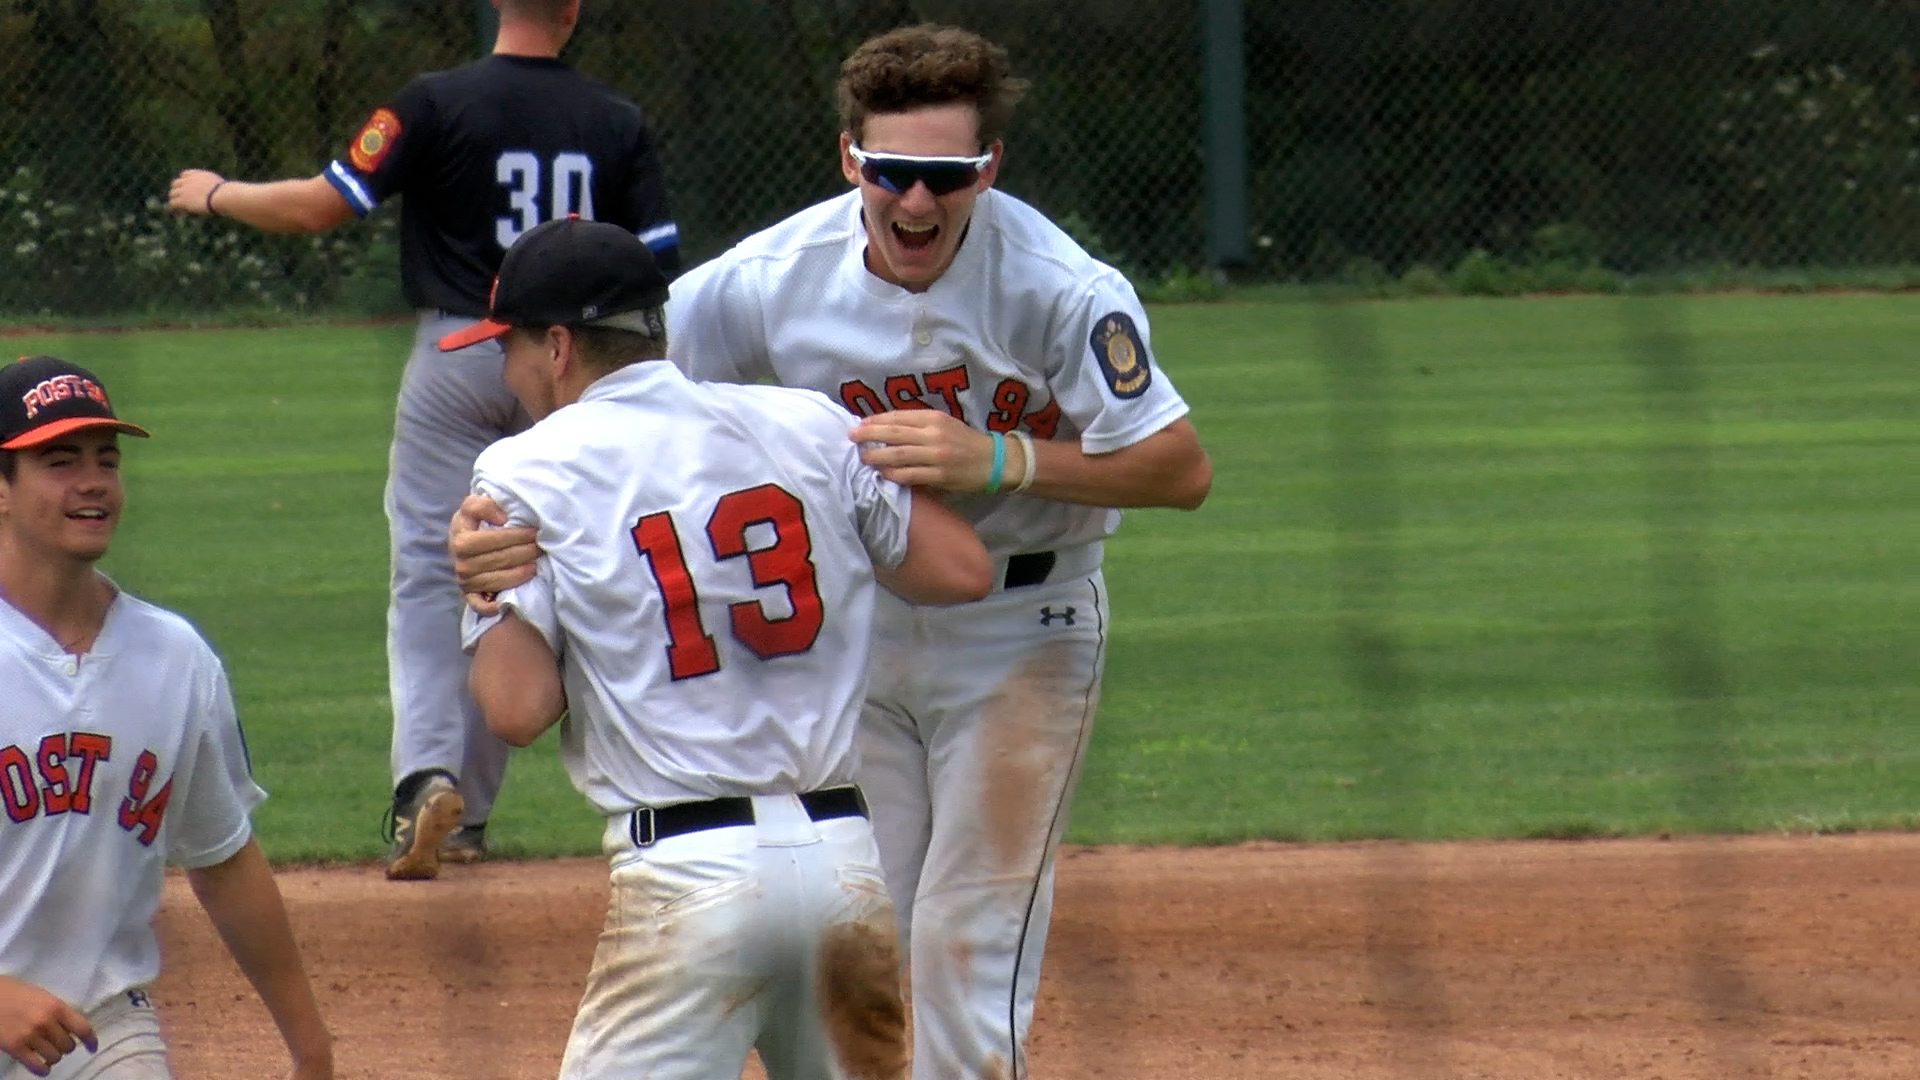 South Charleston completes unbeaten run to the American Legion State